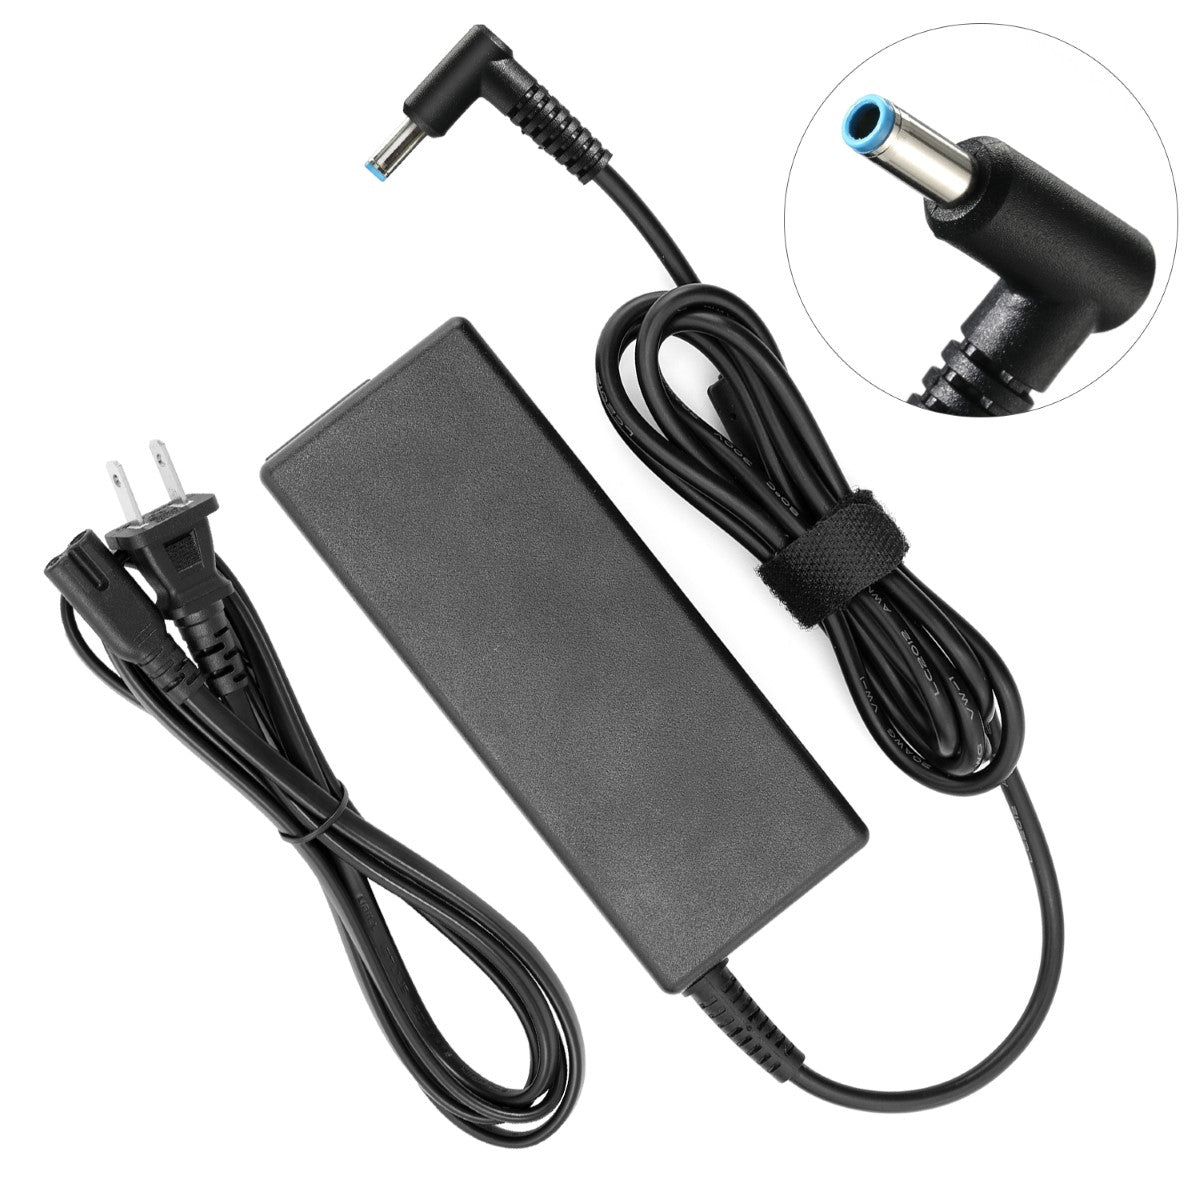 AC Adapter Charger for HP Pavilion 14t-ab000 CTO Laptop.